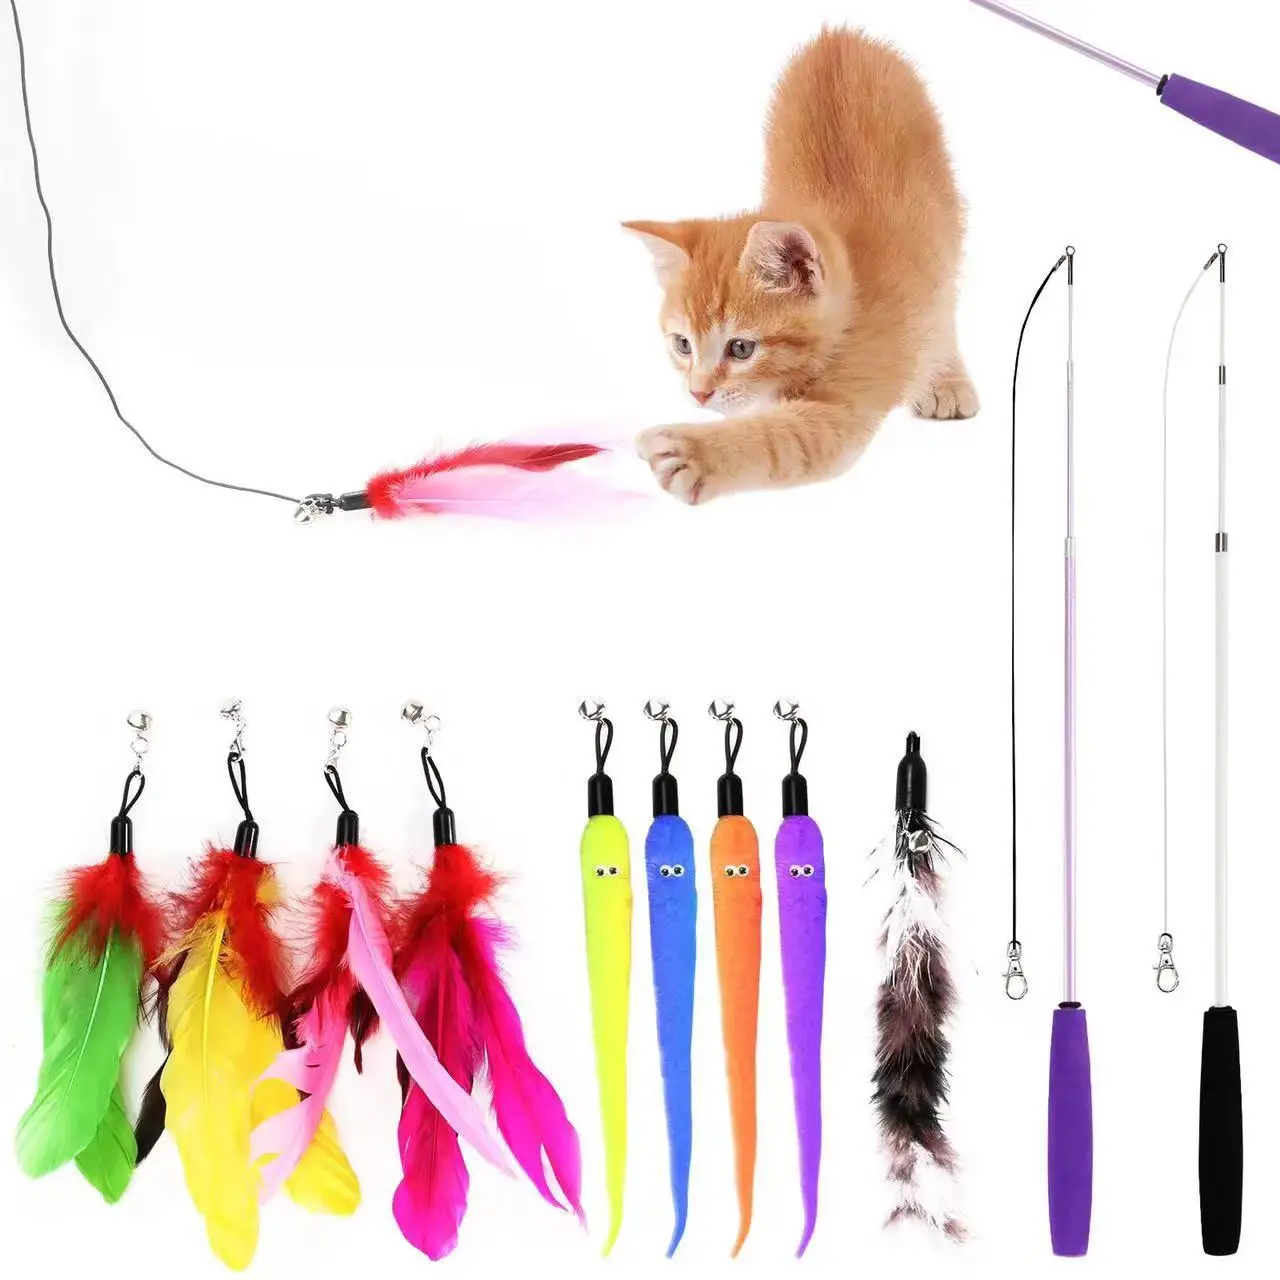 

Retractable Cat Feather Toy Set Retractable Cat Wand Toys and Replacement Teaser with Bell Refills Cat Toy for Indoor Cats Toys